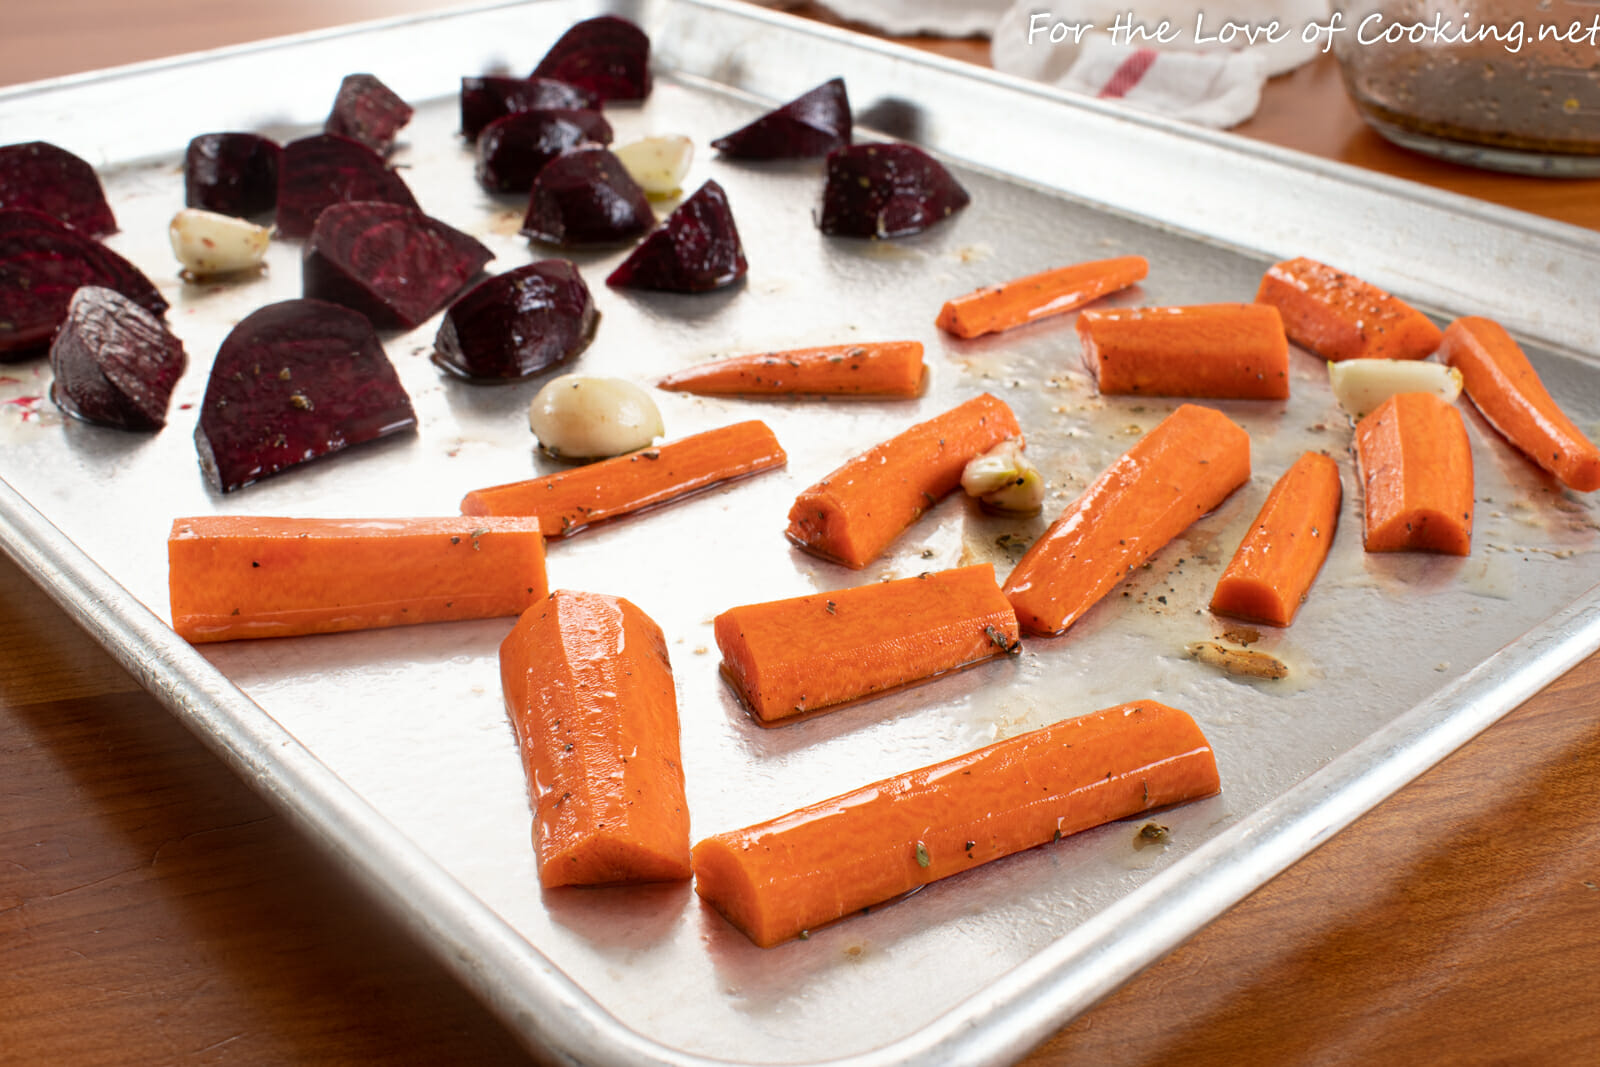 Roasted Beets and Carrots with Feta